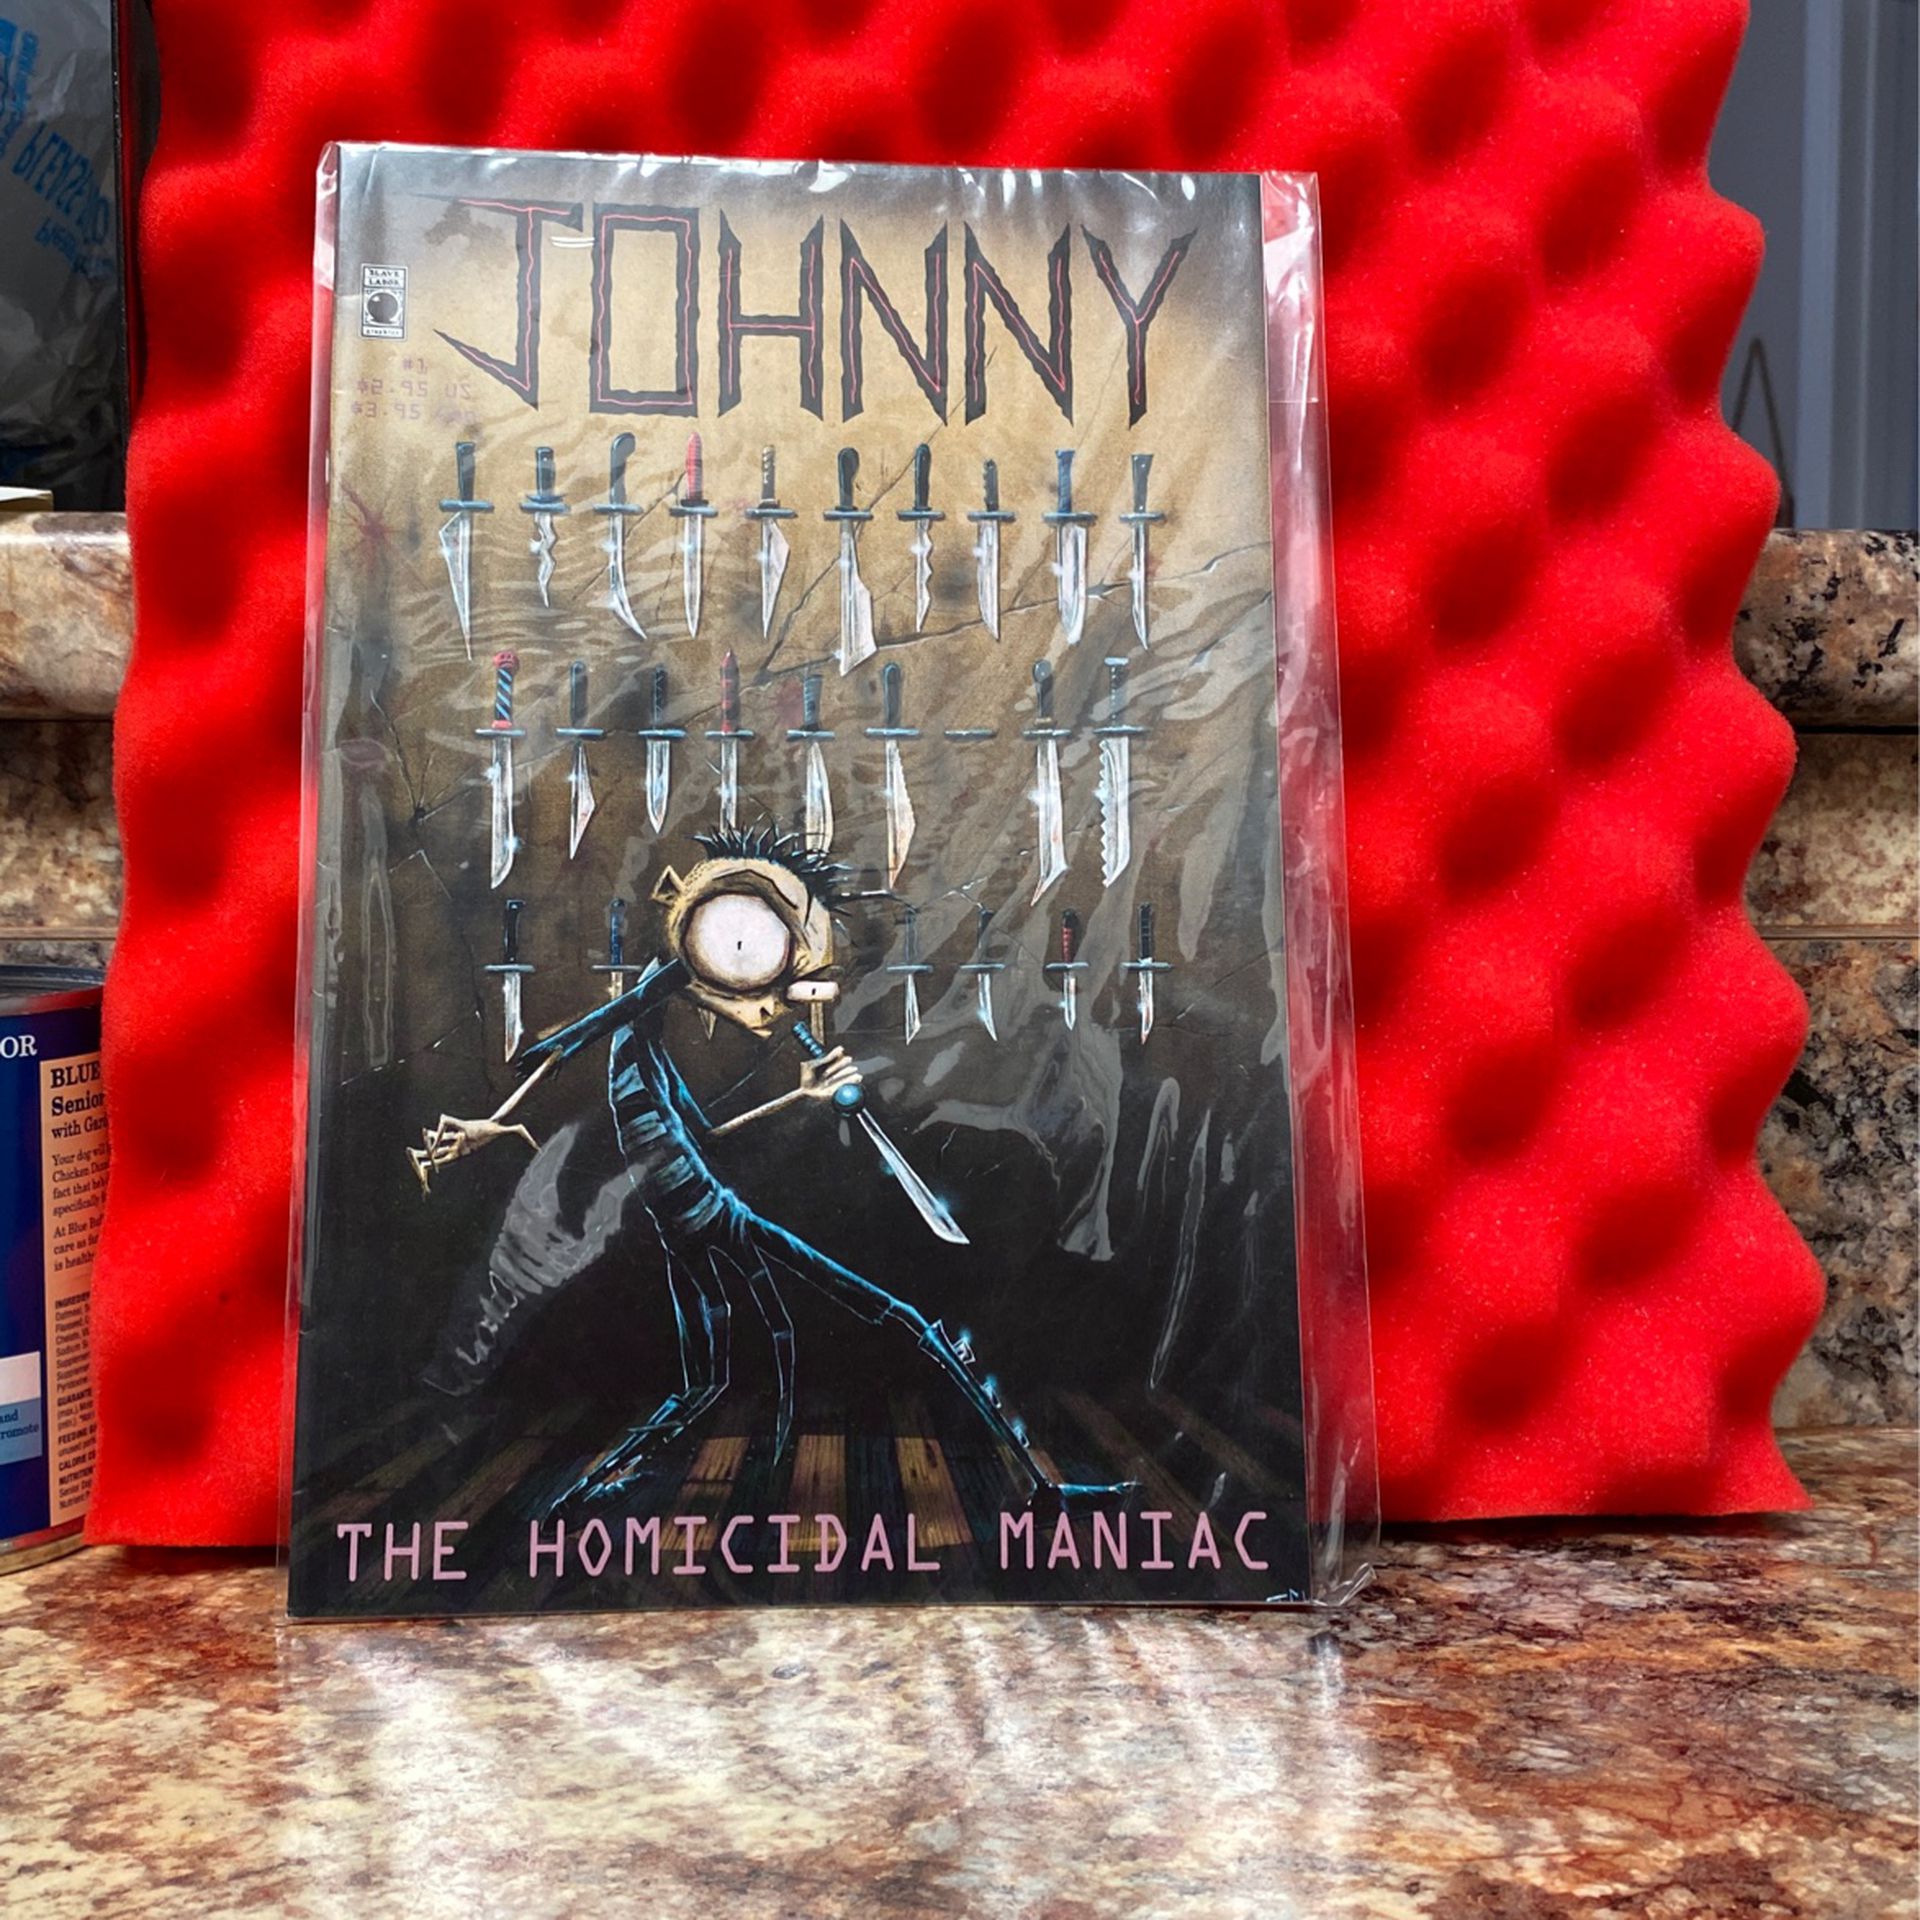 AUTHENTIC “Johnny the homicidal maniac” comic book (1995) 24 Pages